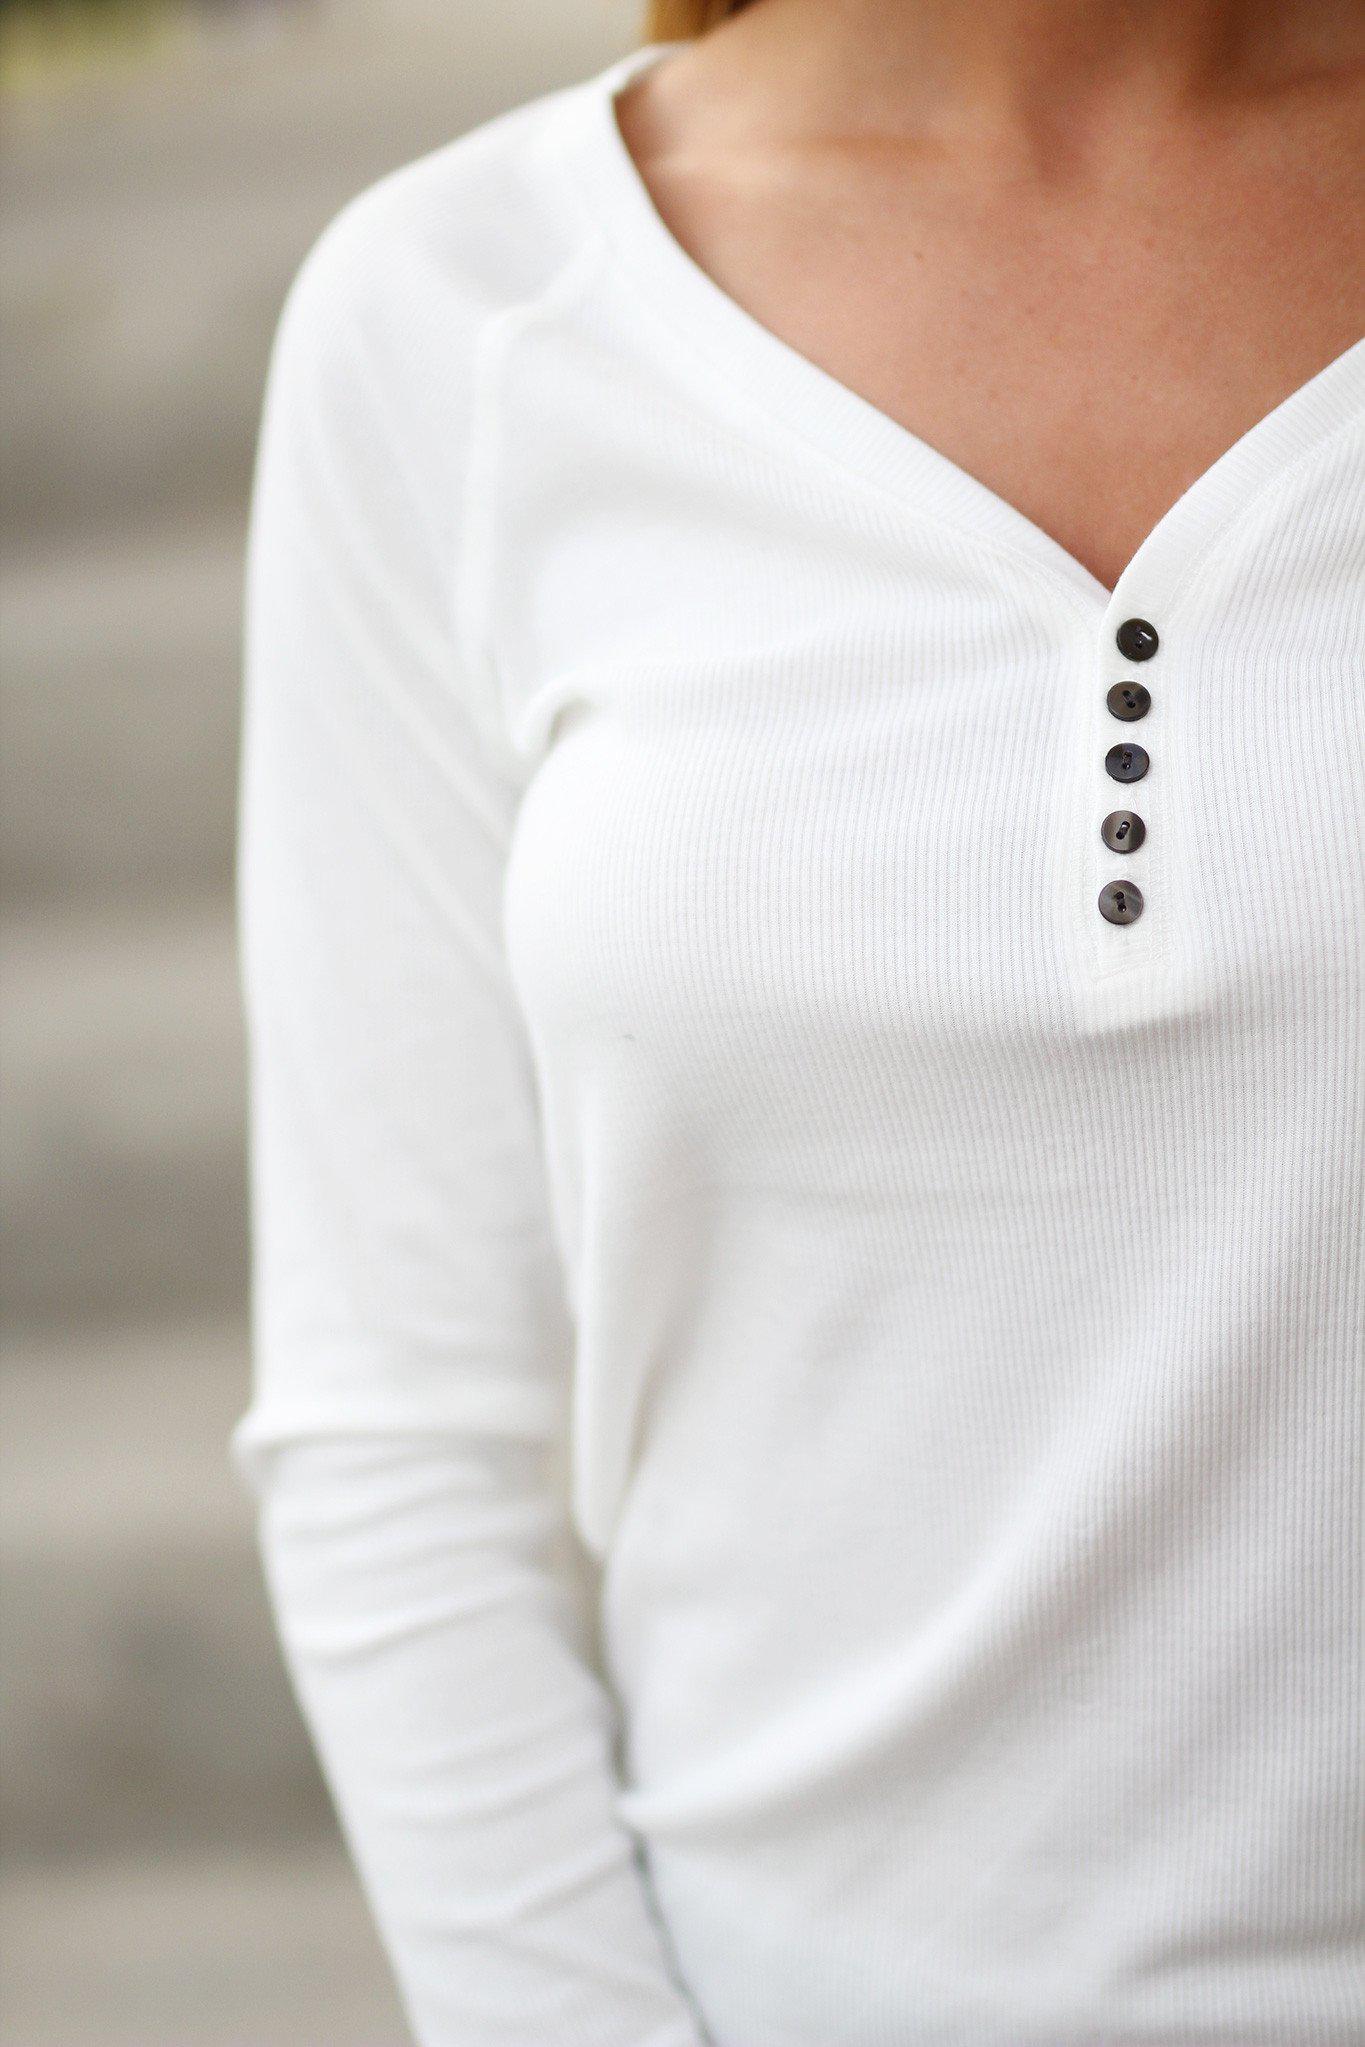 White Ribbed Long Sleeve Top with Buttons